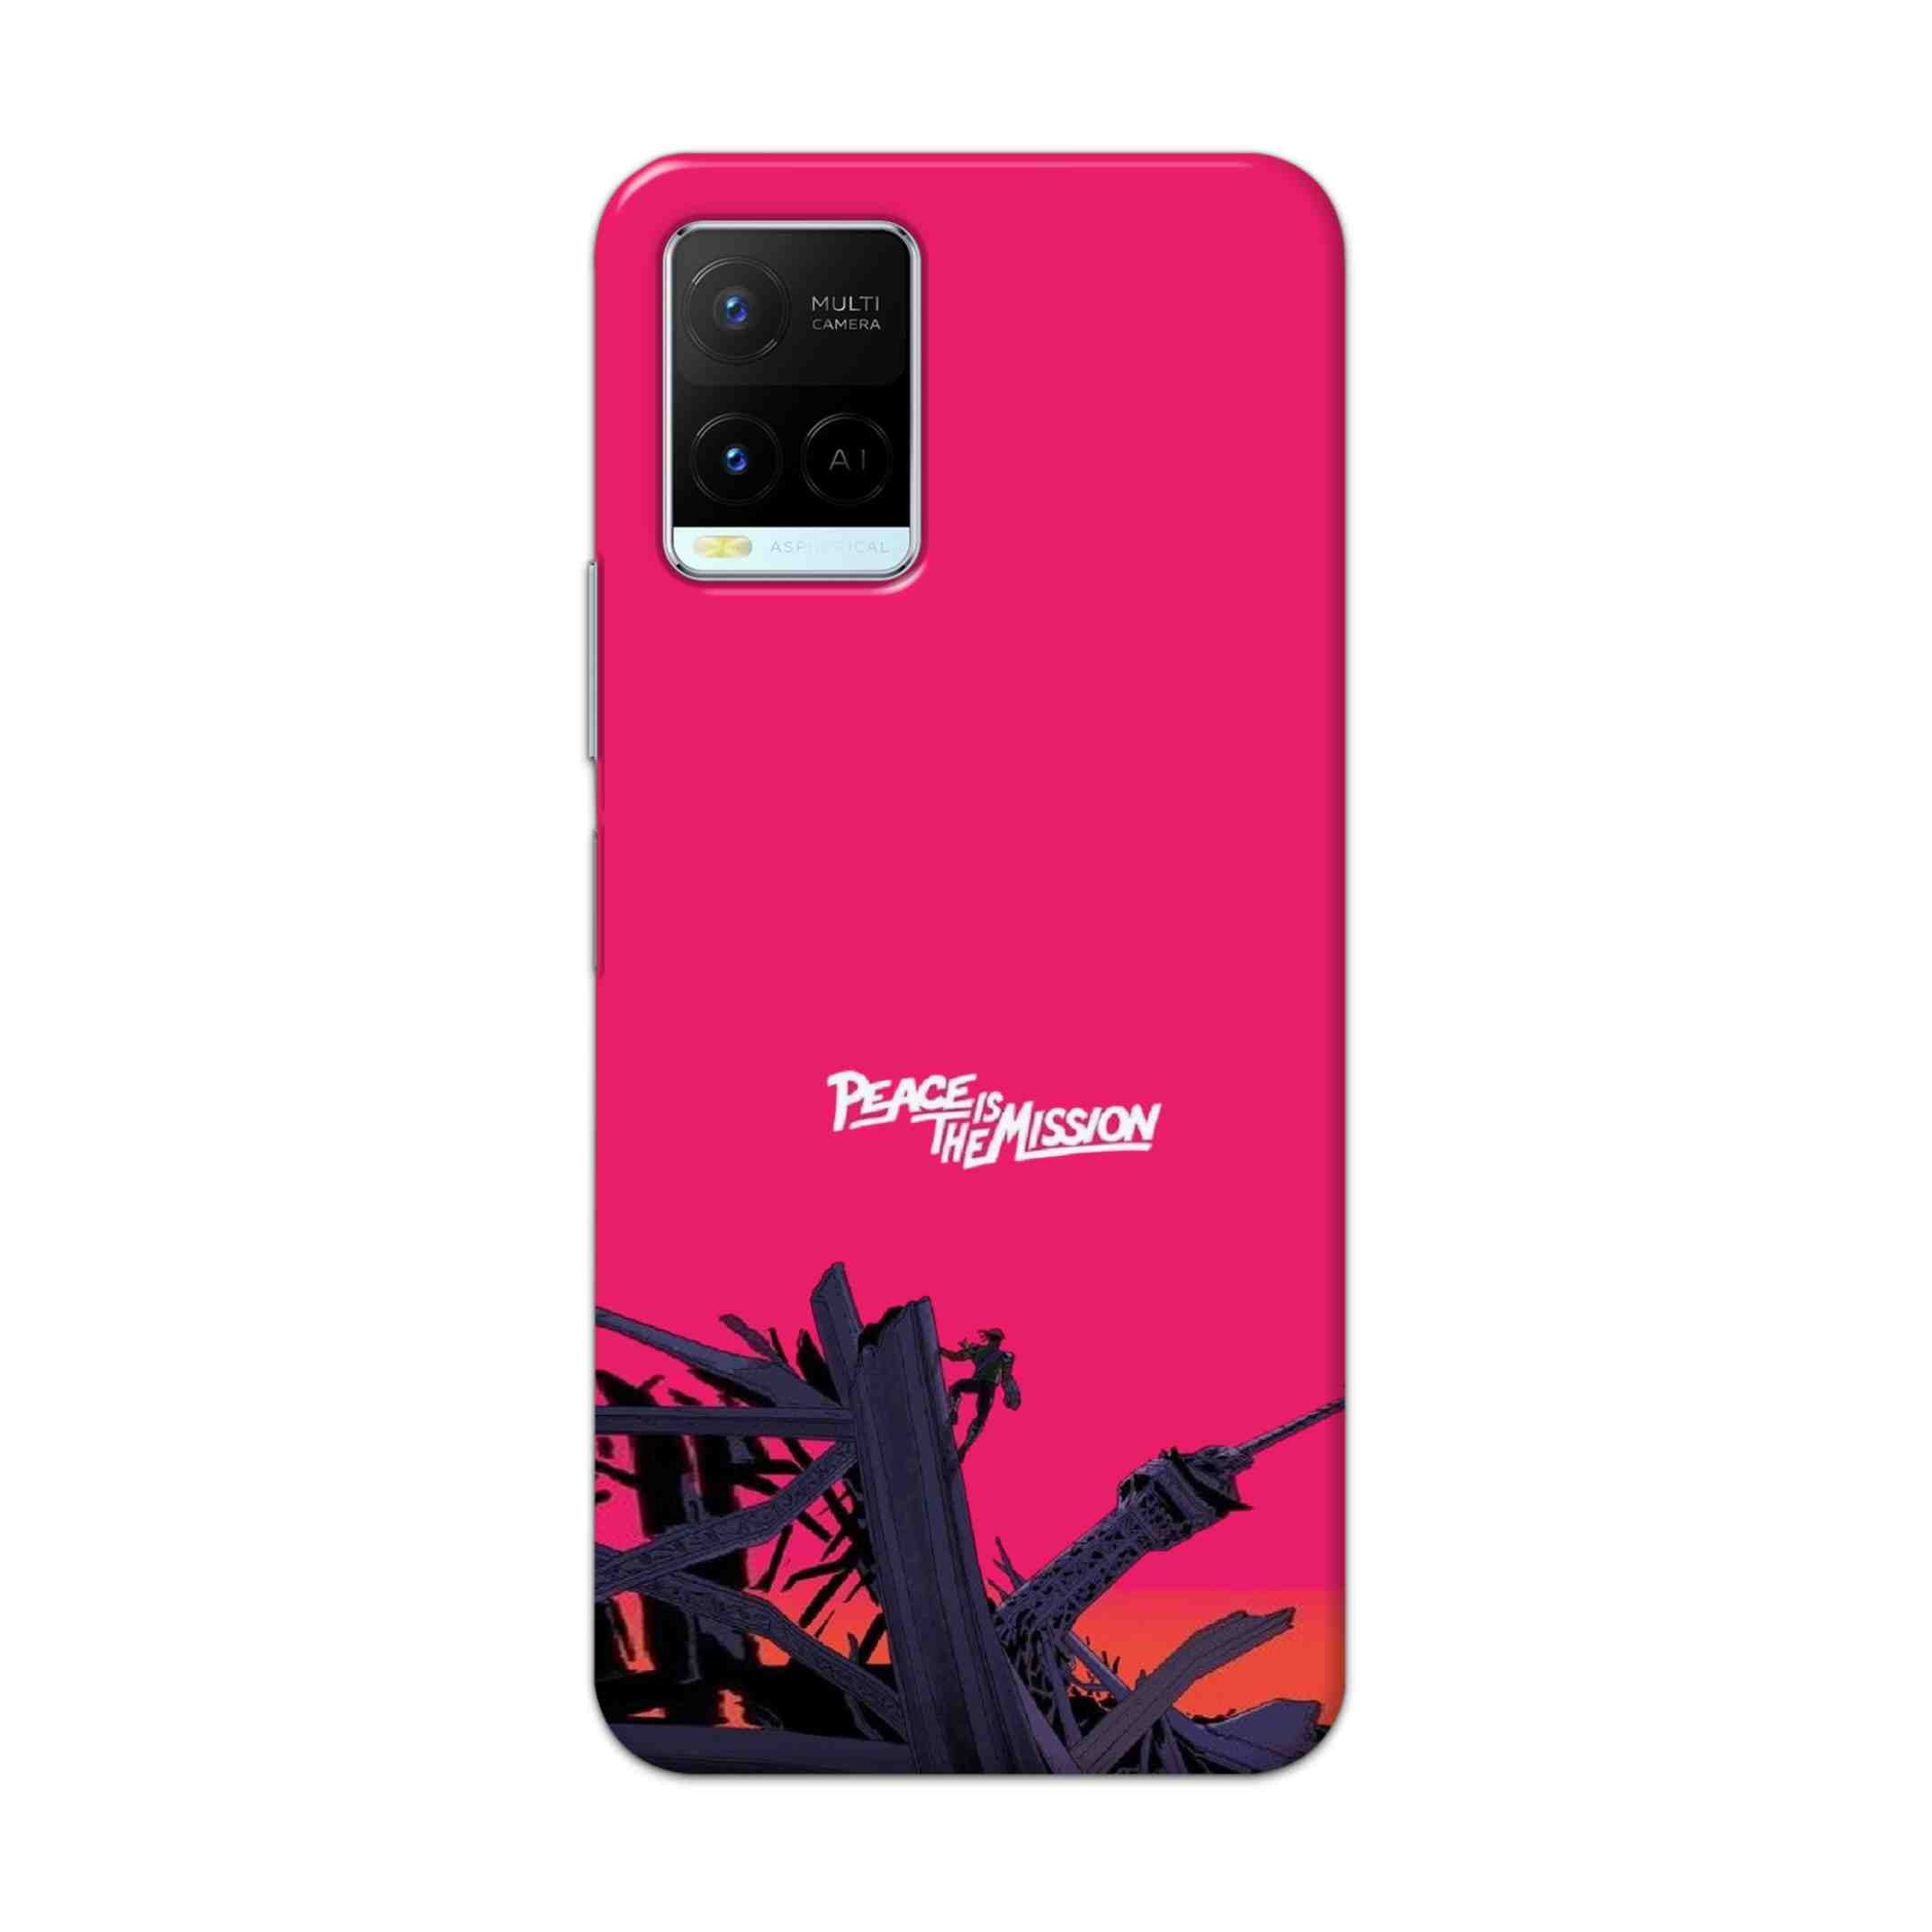 Buy Peace Is The Mission Hard Back Mobile Phone Case Cover For Vivo Y21 2021 Online